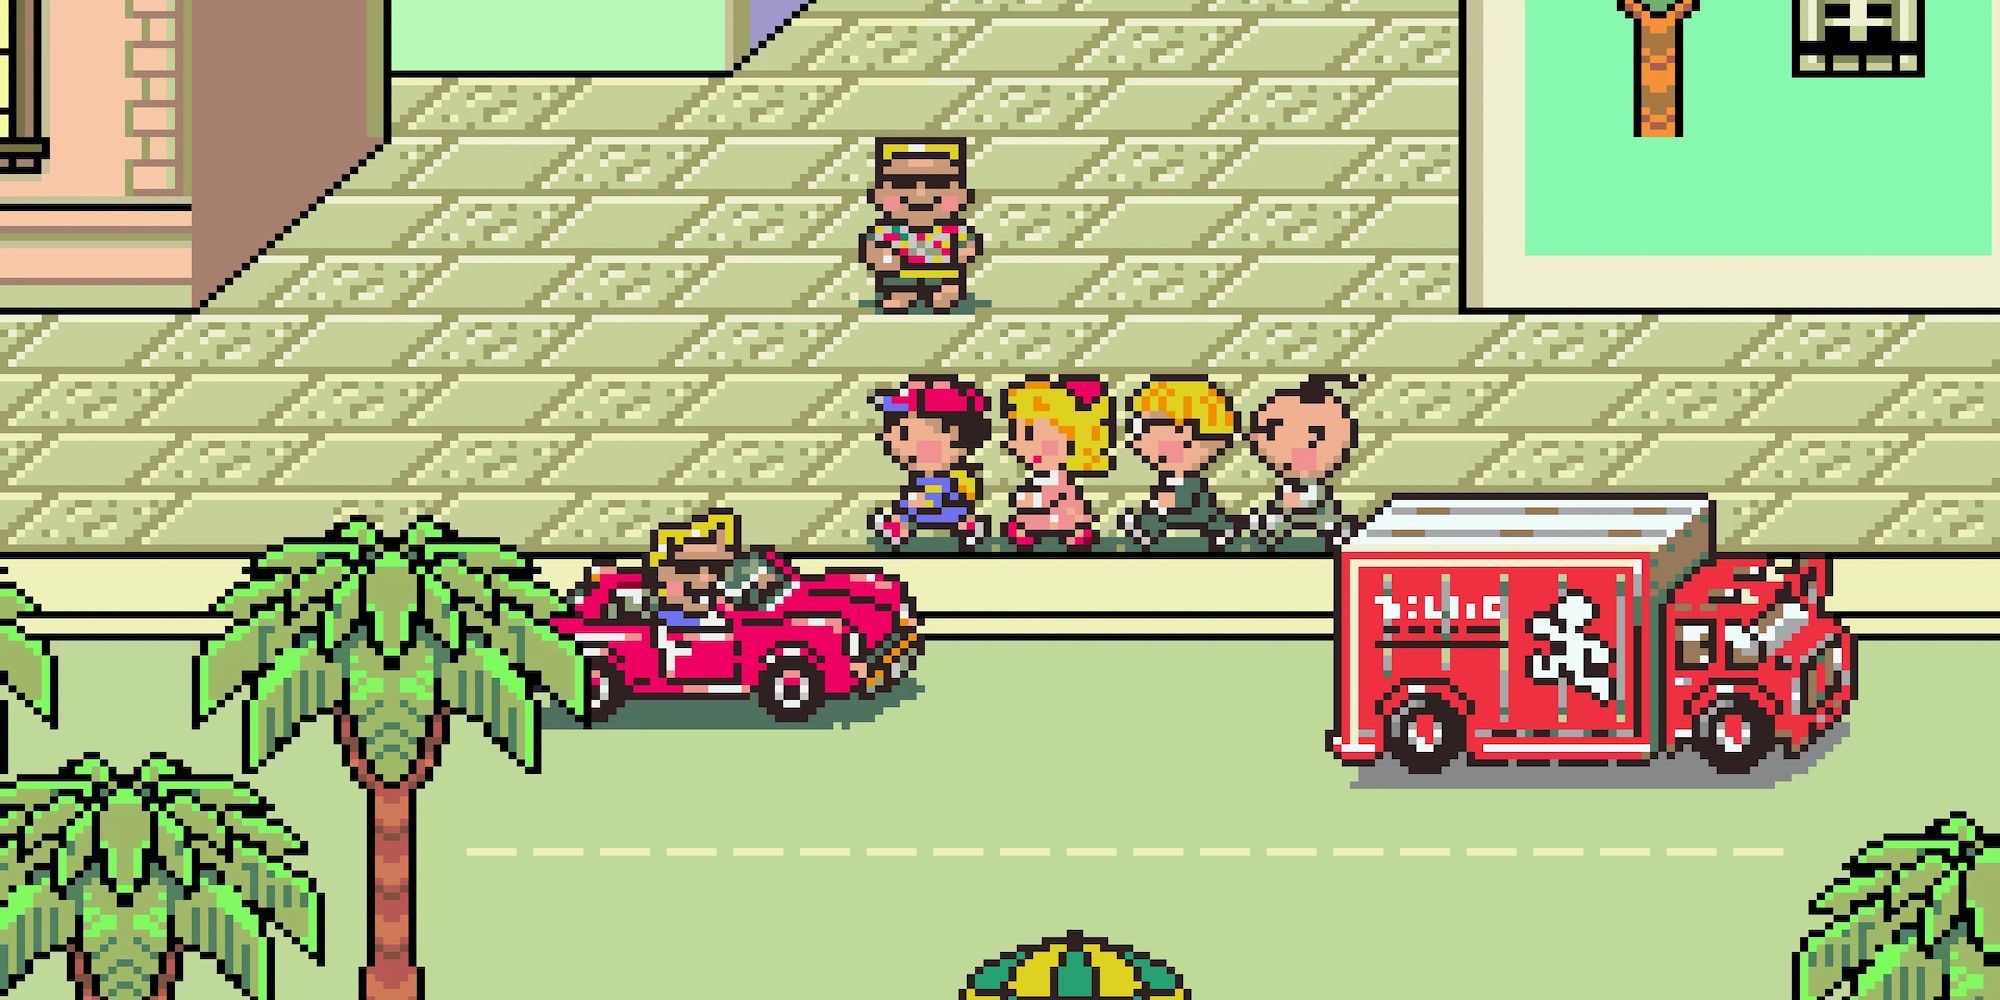 Ness and his party walking in town (EarthBound)